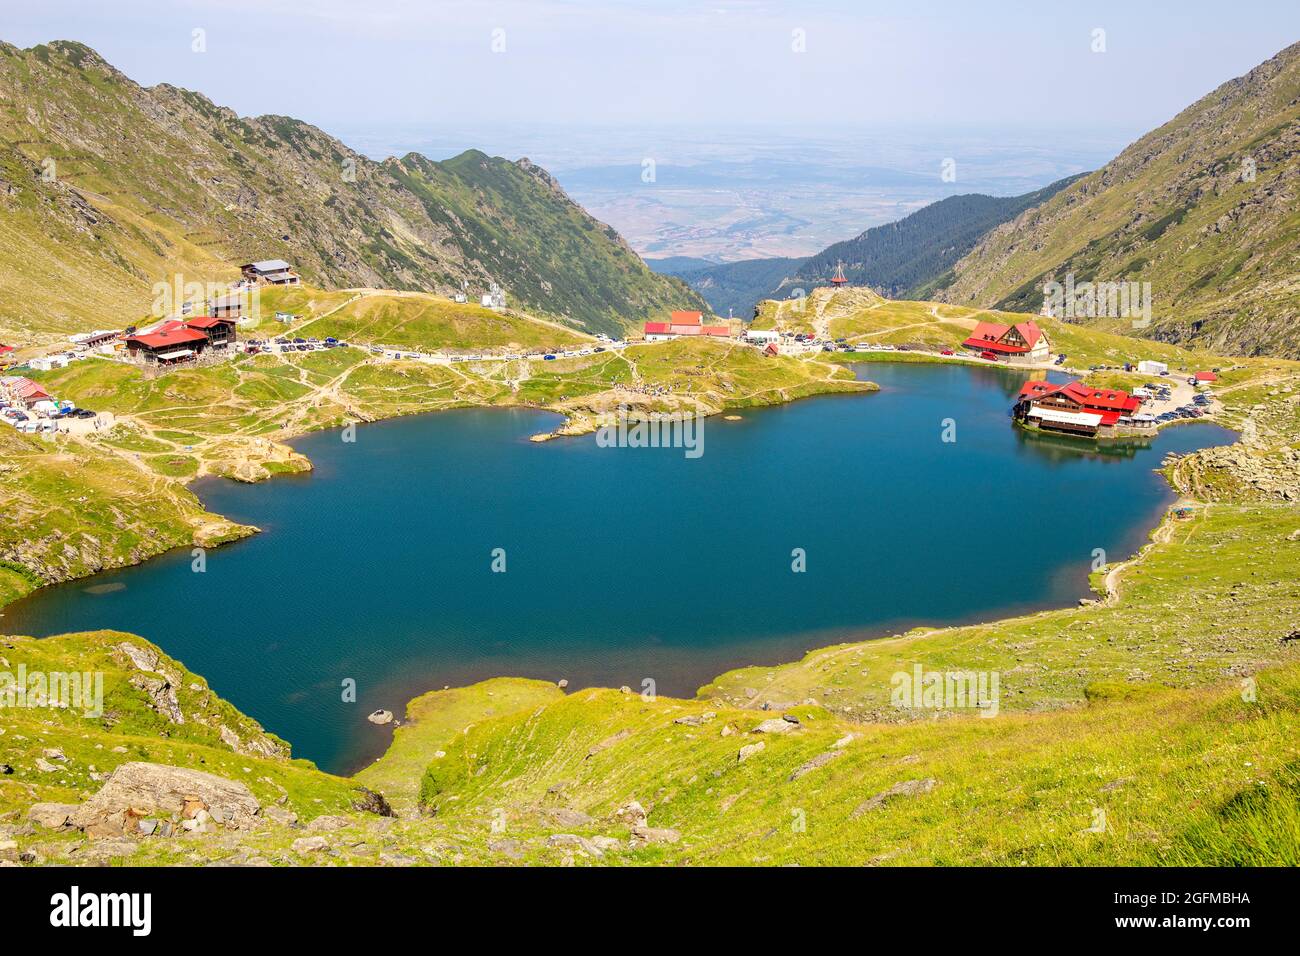 Romania: Lake Balea (Romanian: Balea Lac) from above. The lake is located  at the top of the pass on the Transfagaras High Road in the Fagaras  Mountain Stock Photo - Alamy